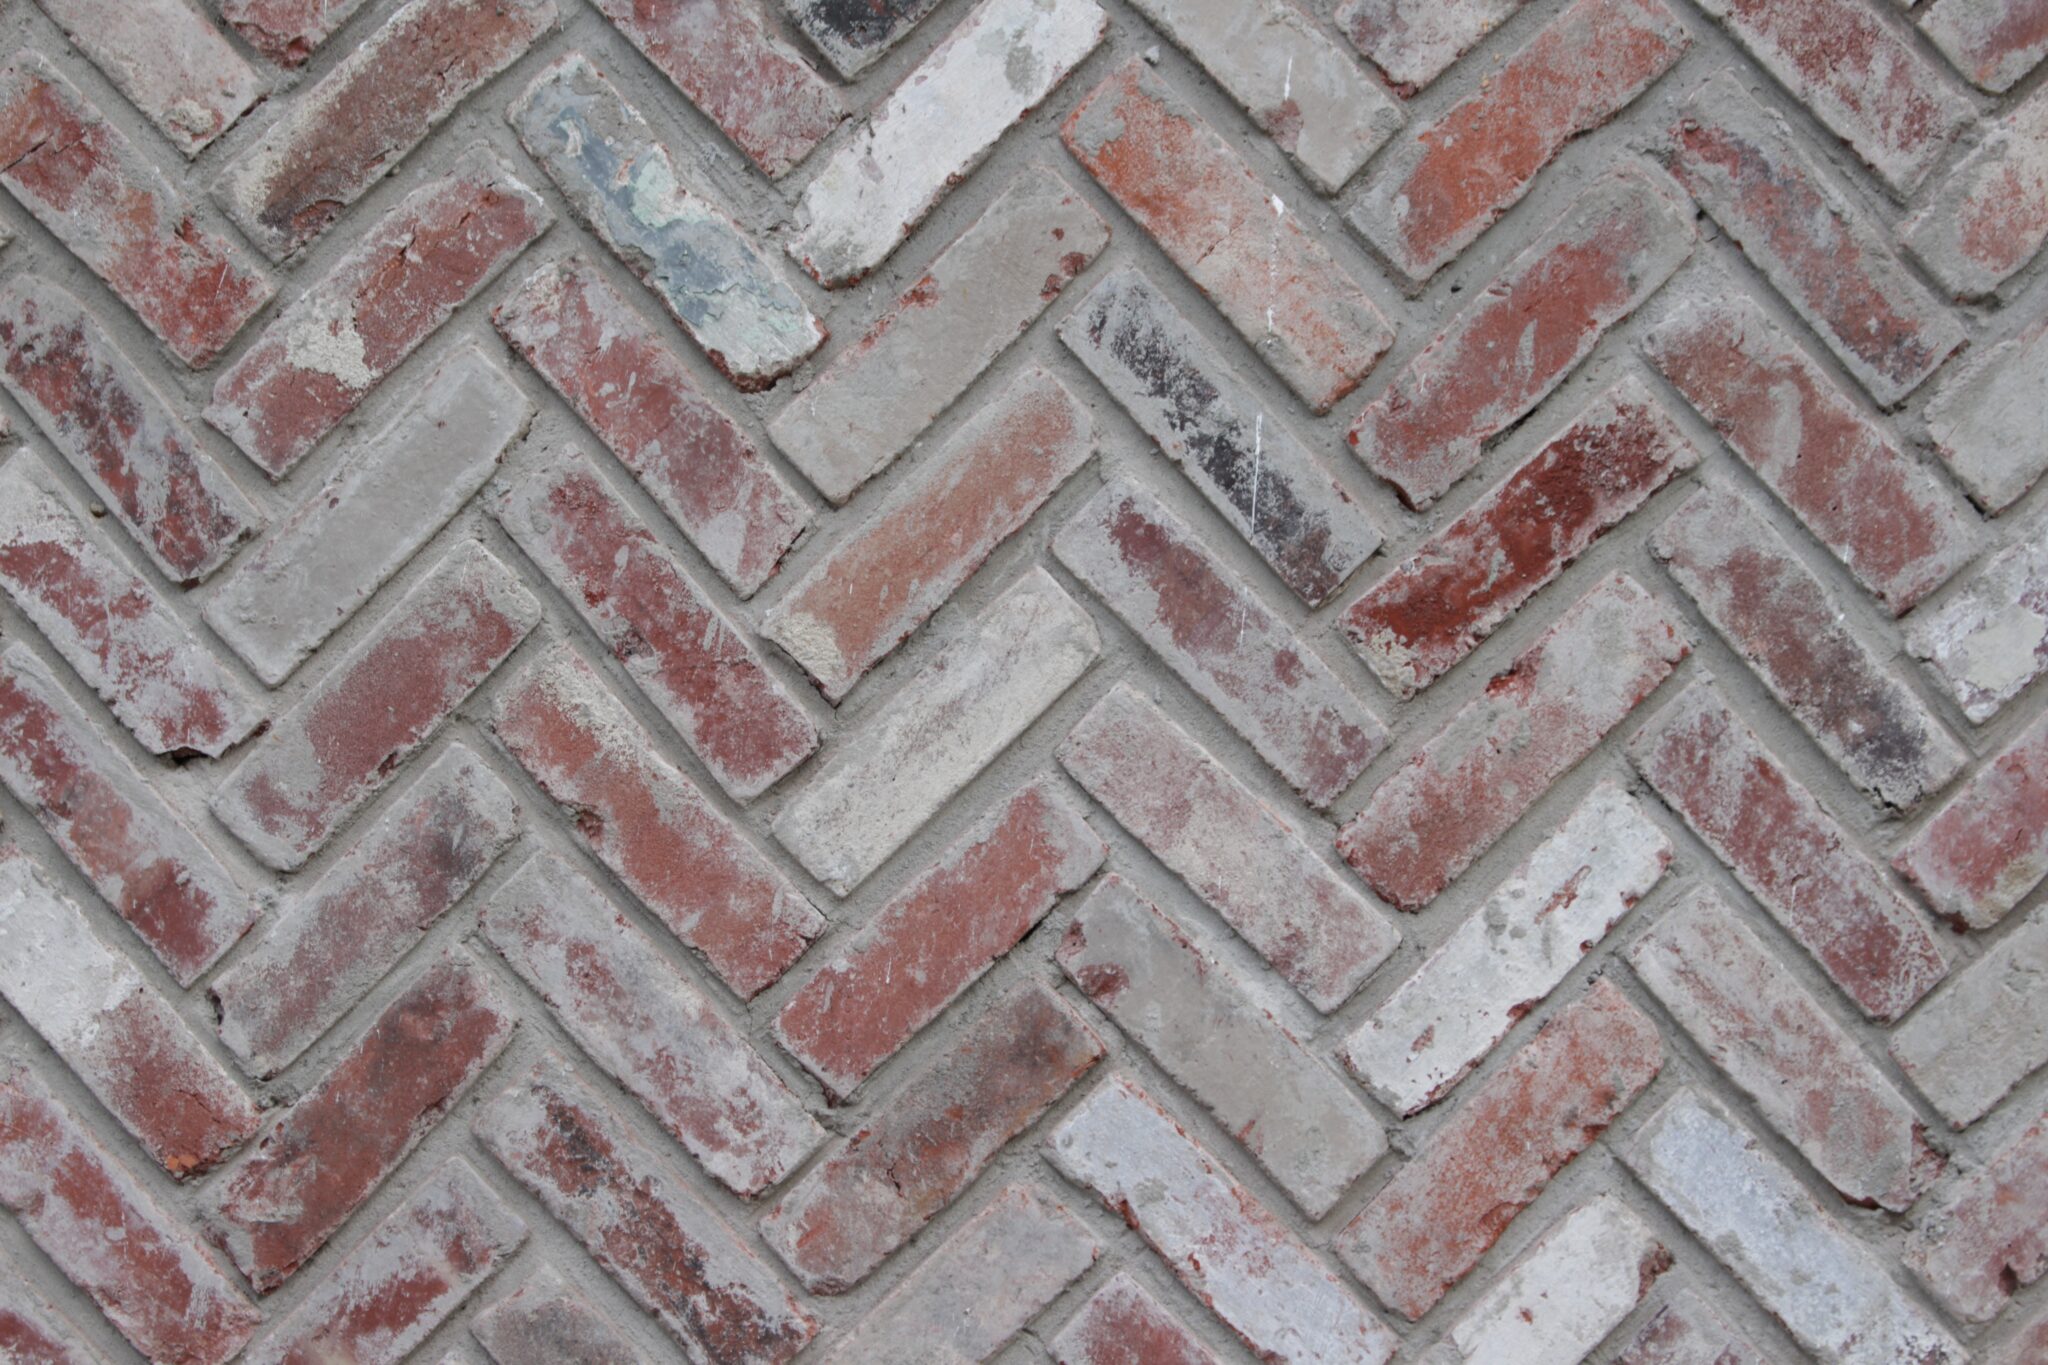 Technical Details: An Architect's Guide to Setting Out Brickwork